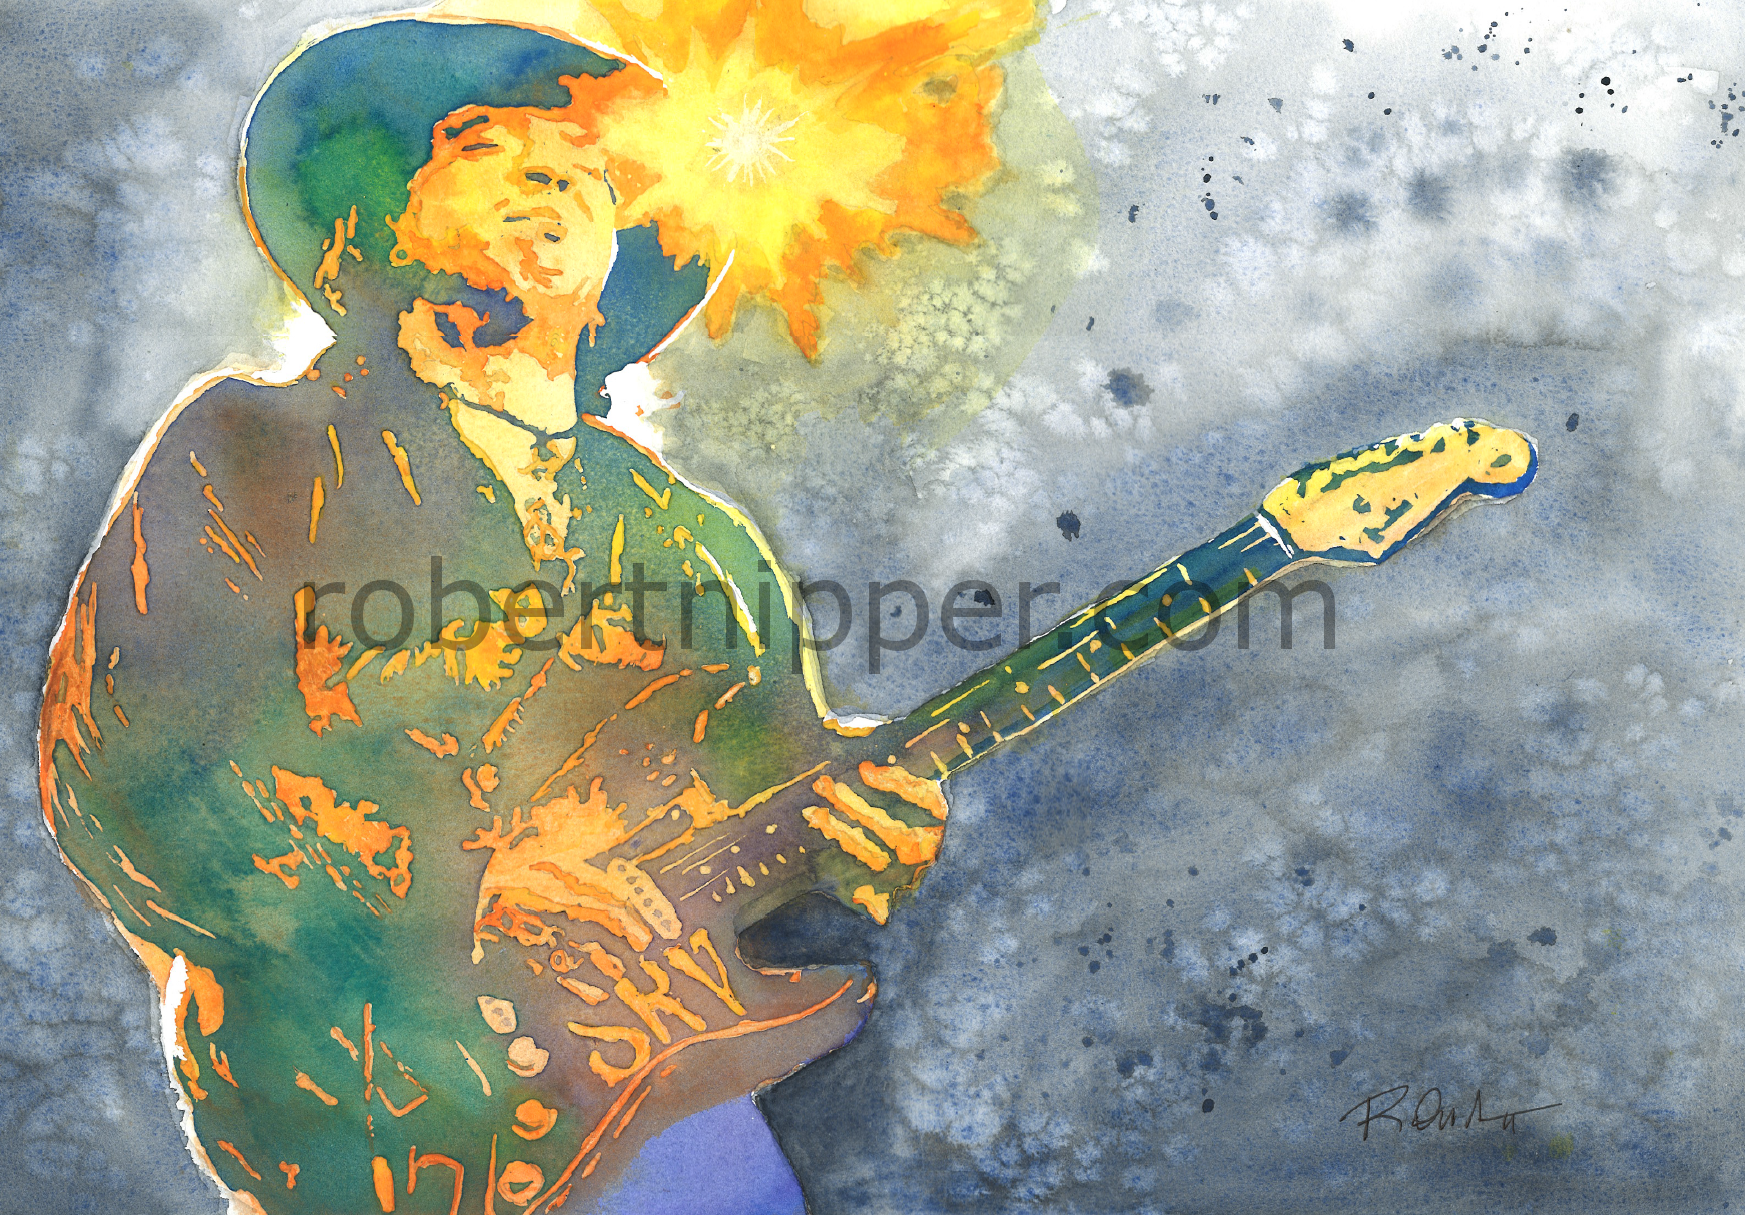 A vivid watercolor portrait of Stevie Ray Vaughan, playing guitar on stage.